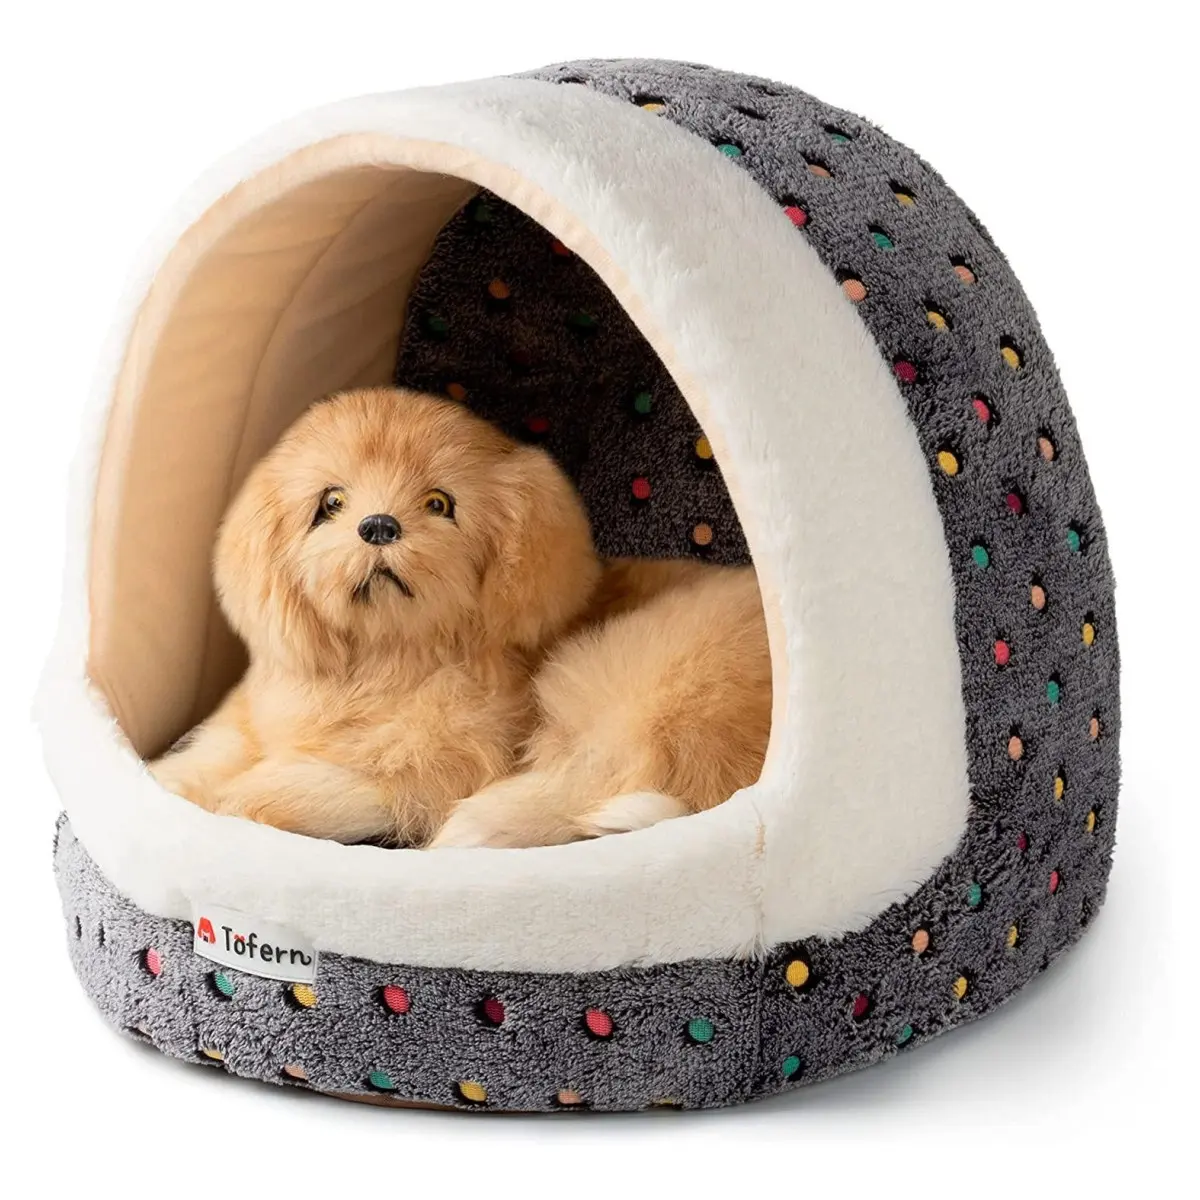 Dog Beds For Cats Colorful Dots Pattern Striped Cute Fleece Warm Washable Pet Bed With Removable Cover